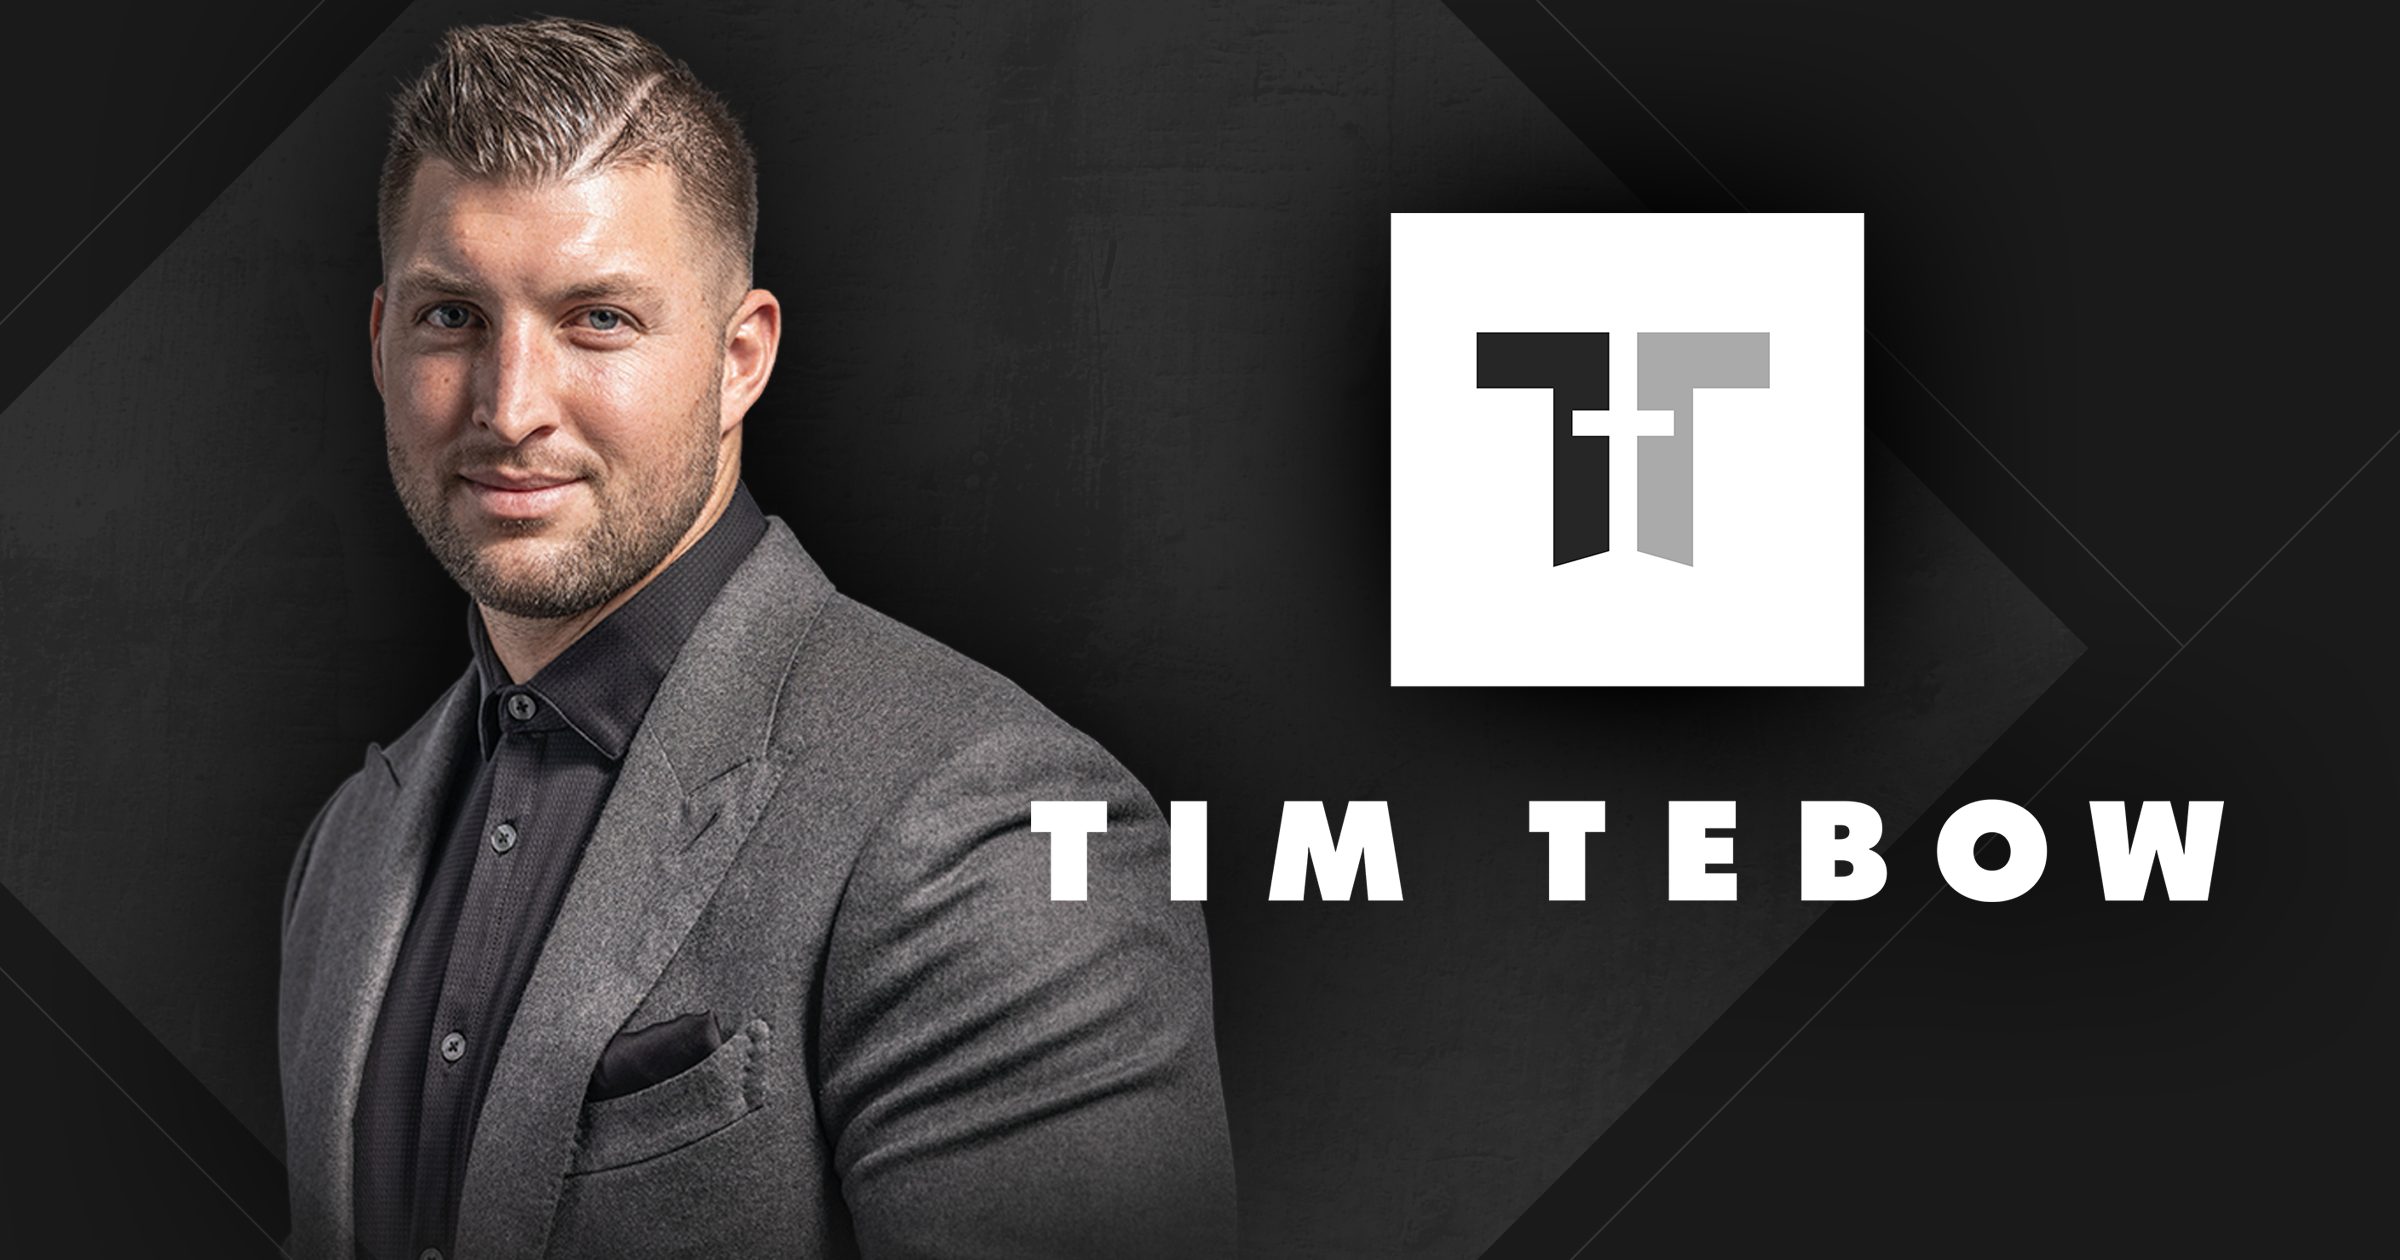 Tim Tebow Official Website  The Online Home of Tim Tebow